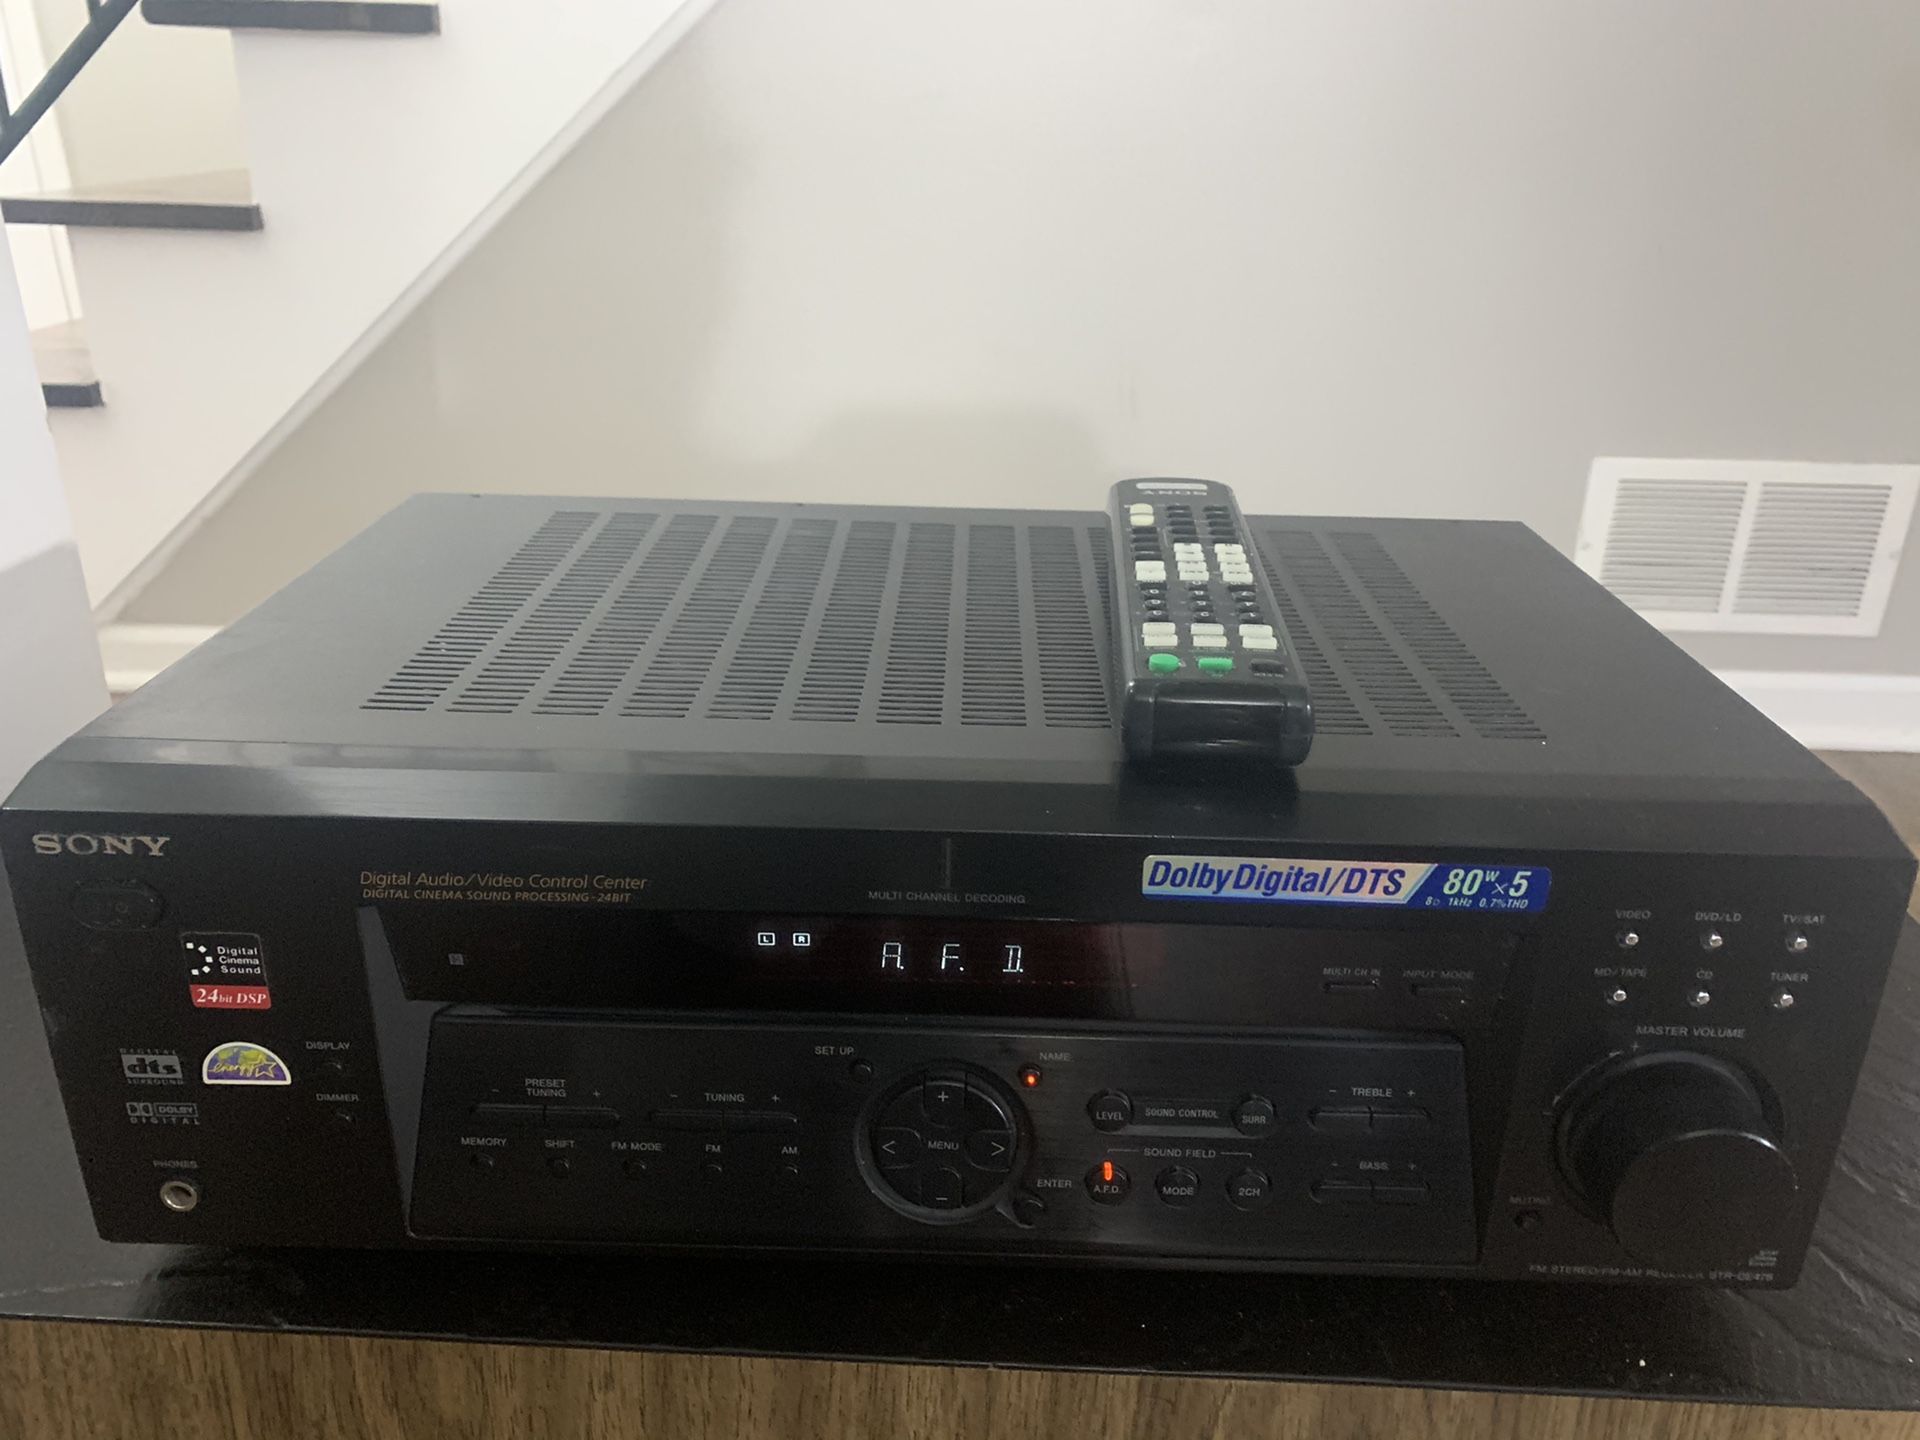 SONY STR-DE475 FM Stereo / AM receiver 80Wx5 Dolby Digital / DTS Amplifier. Remote included.